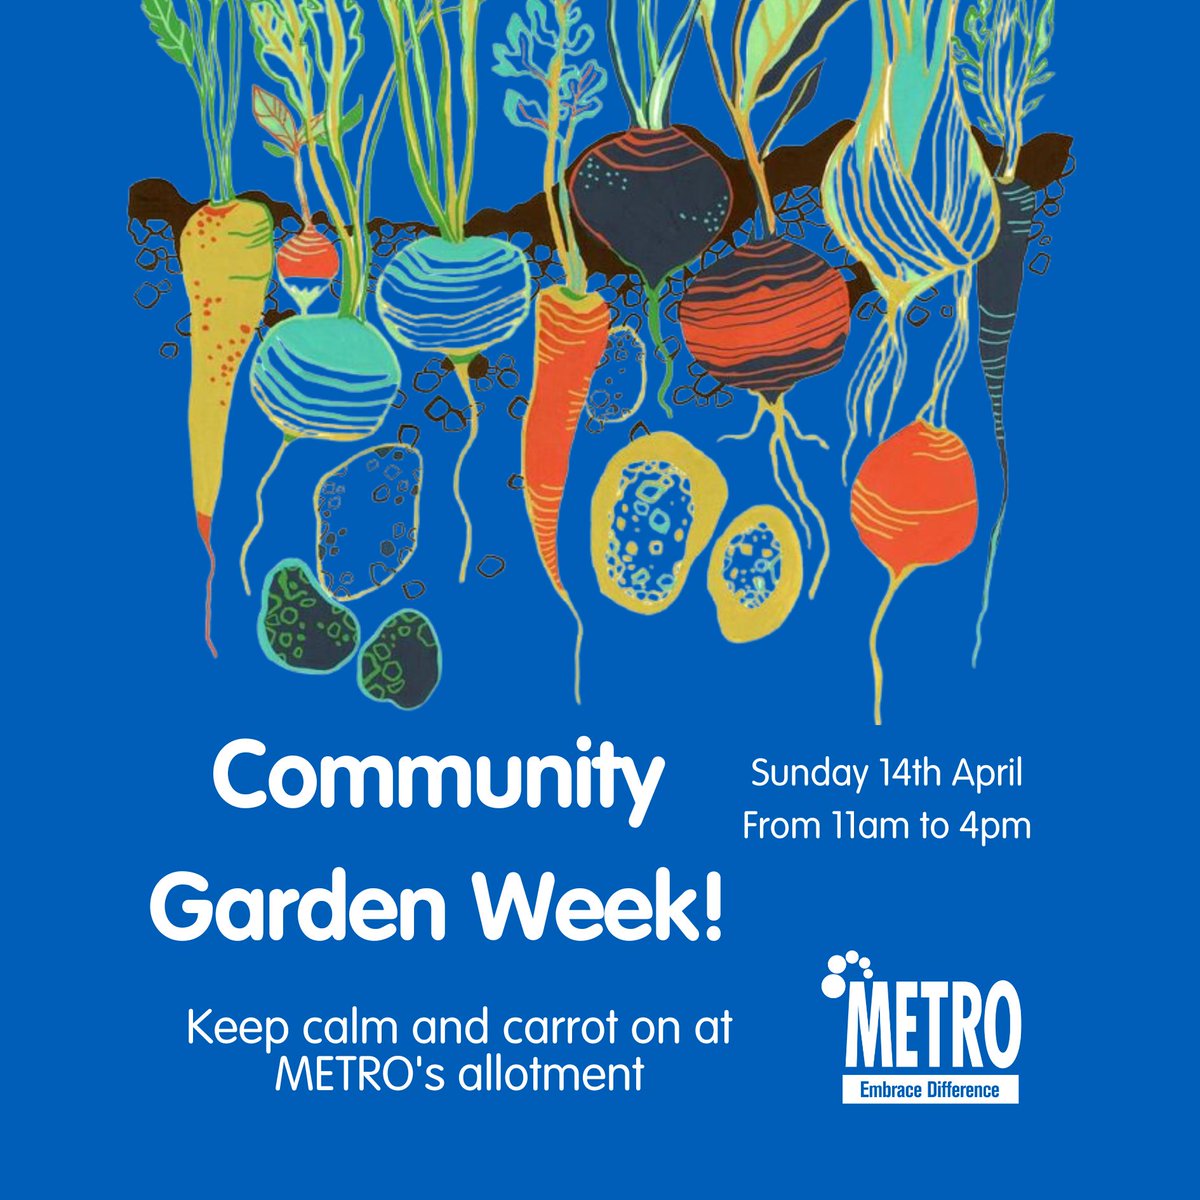 Whether you're a first time gardener, or are the next gardening superstar, all are welcome! No prior knowledge is needed, and all equipment will be provided. 

We look forward to welcoming you! #CommunityGardenWeek